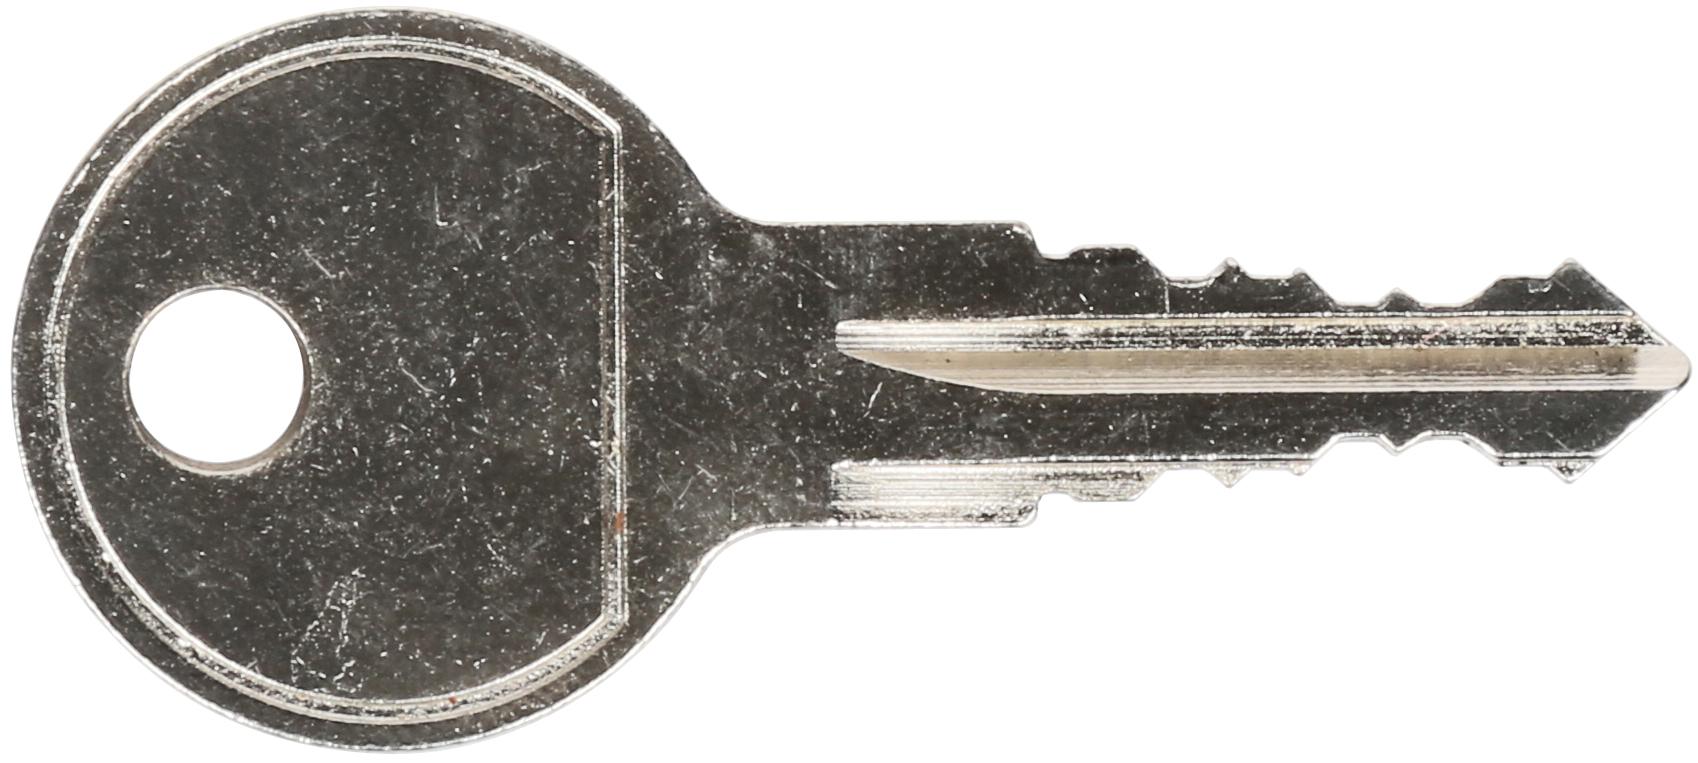 Spare Roof Box Key 132